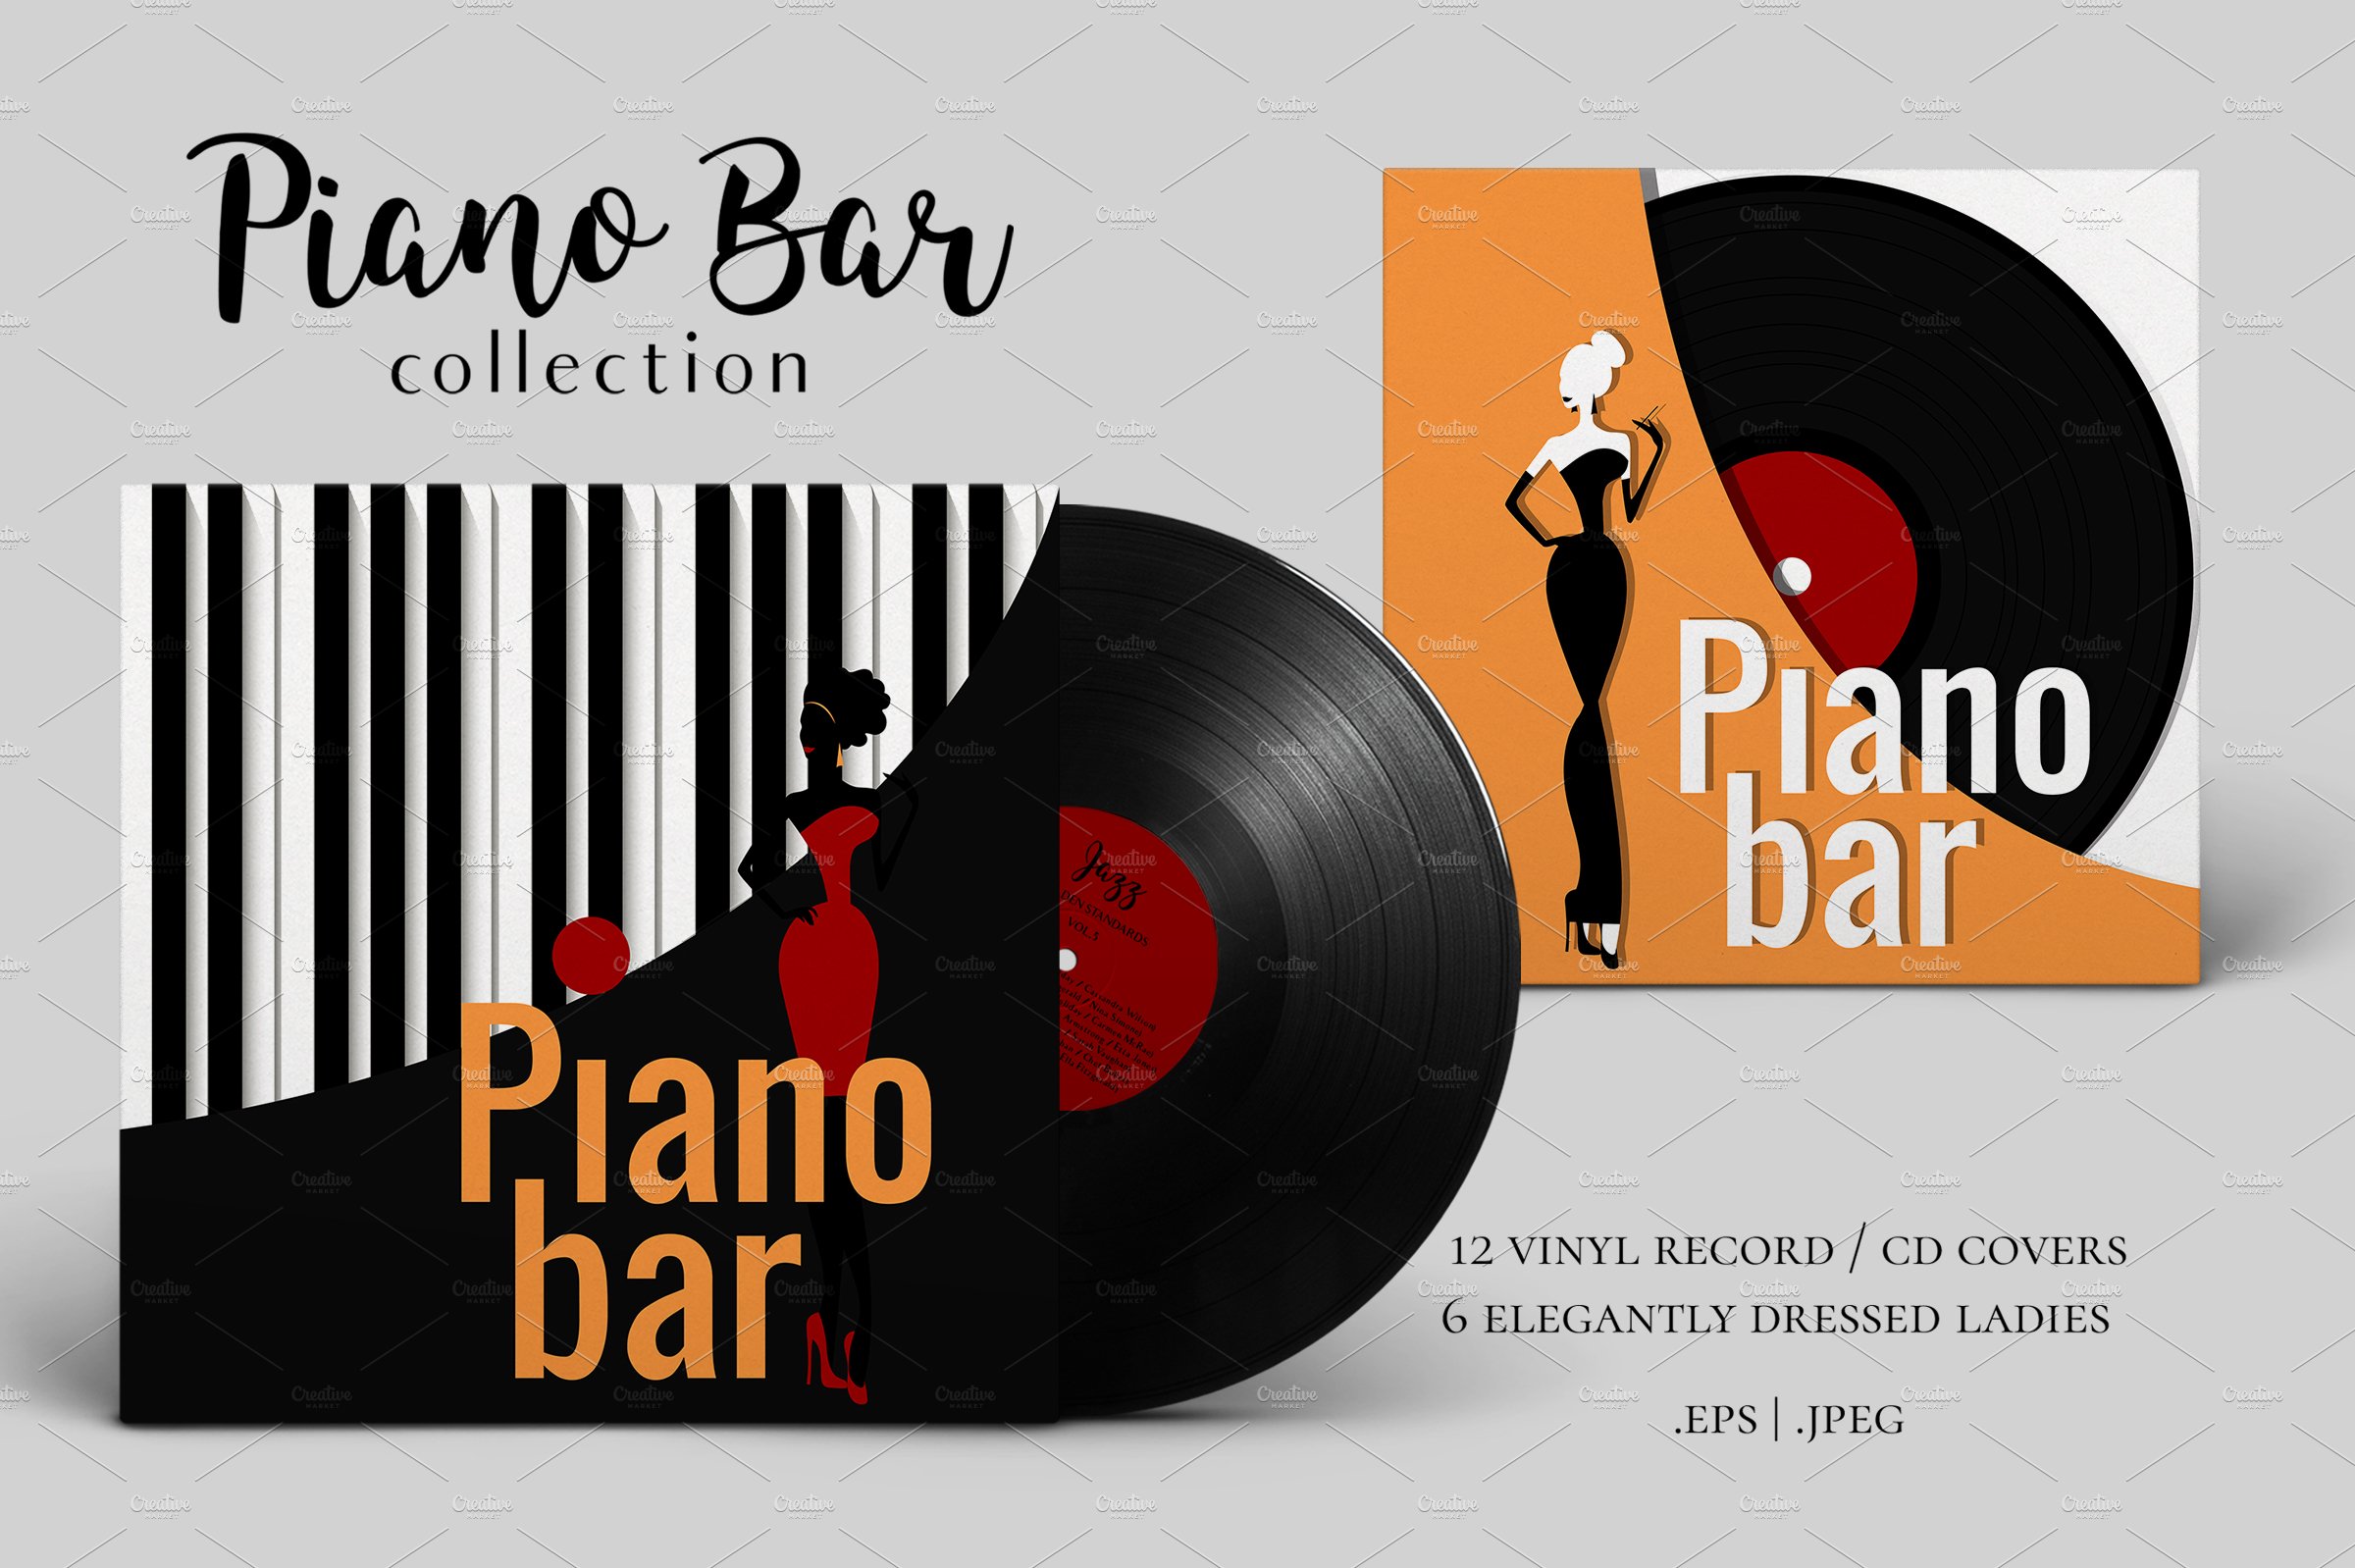 Piano Bar Collection cover image.